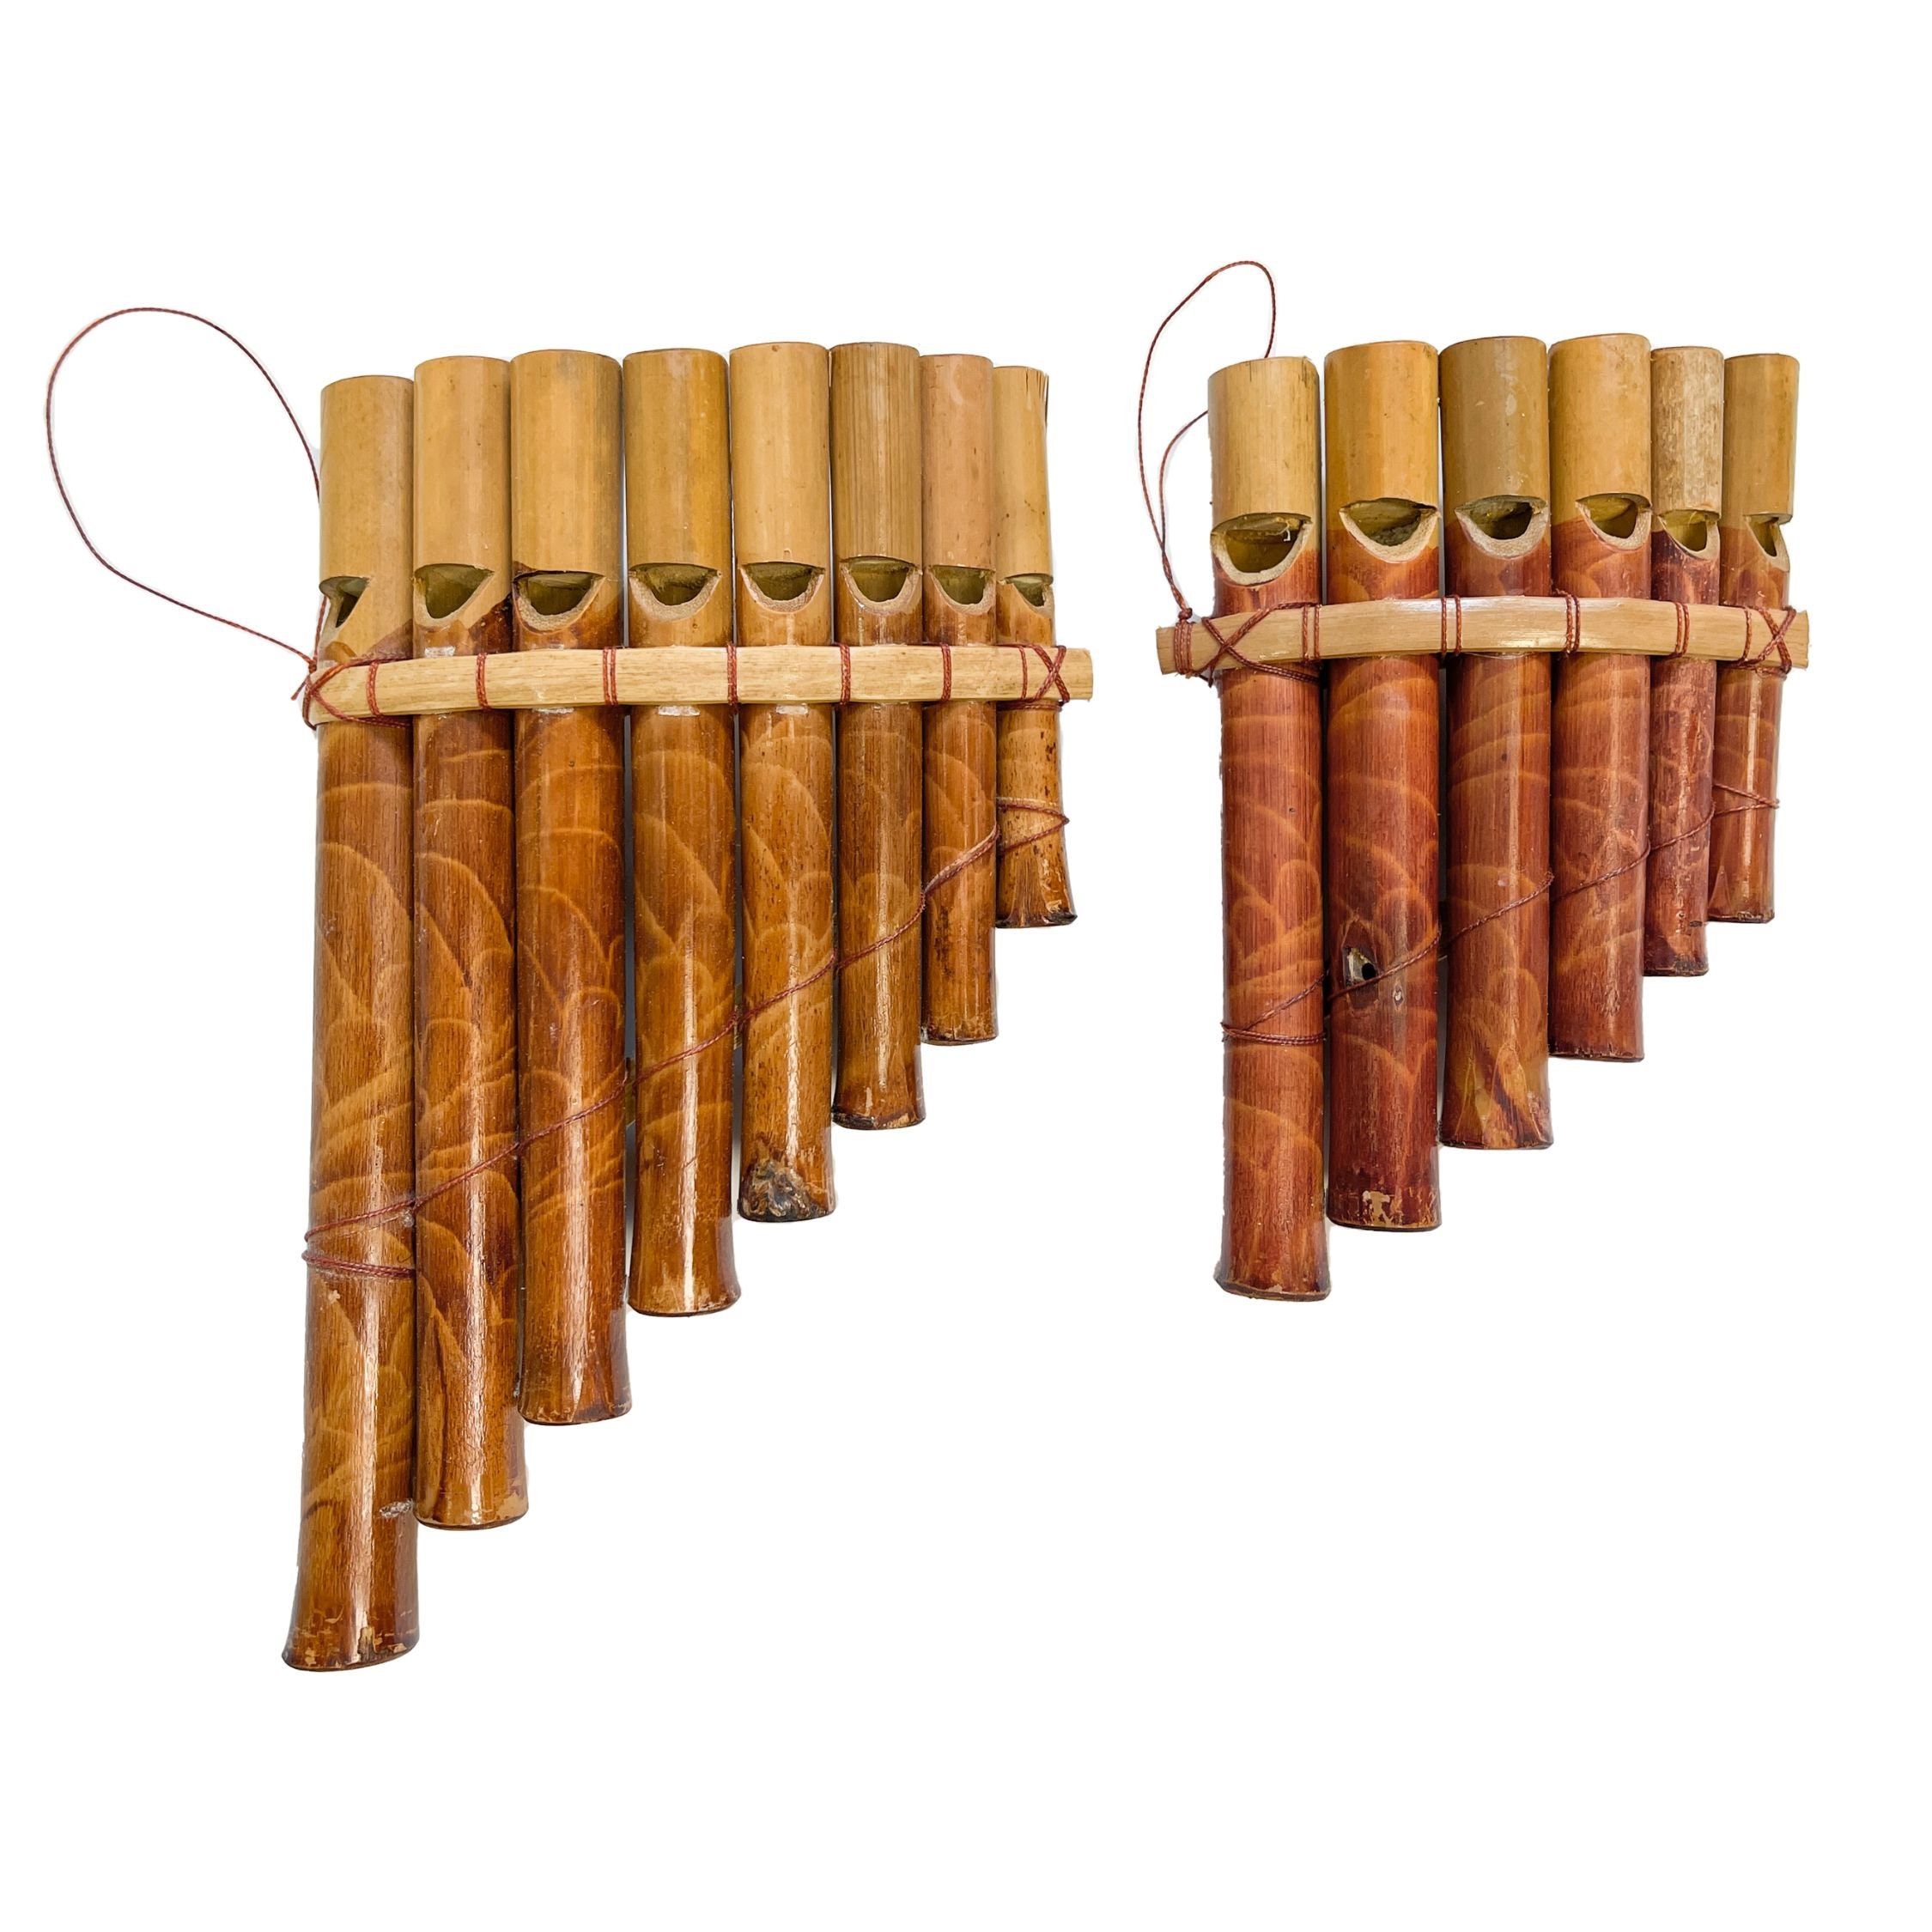 Types Of Bamboo Instruments | lupon.gov.ph